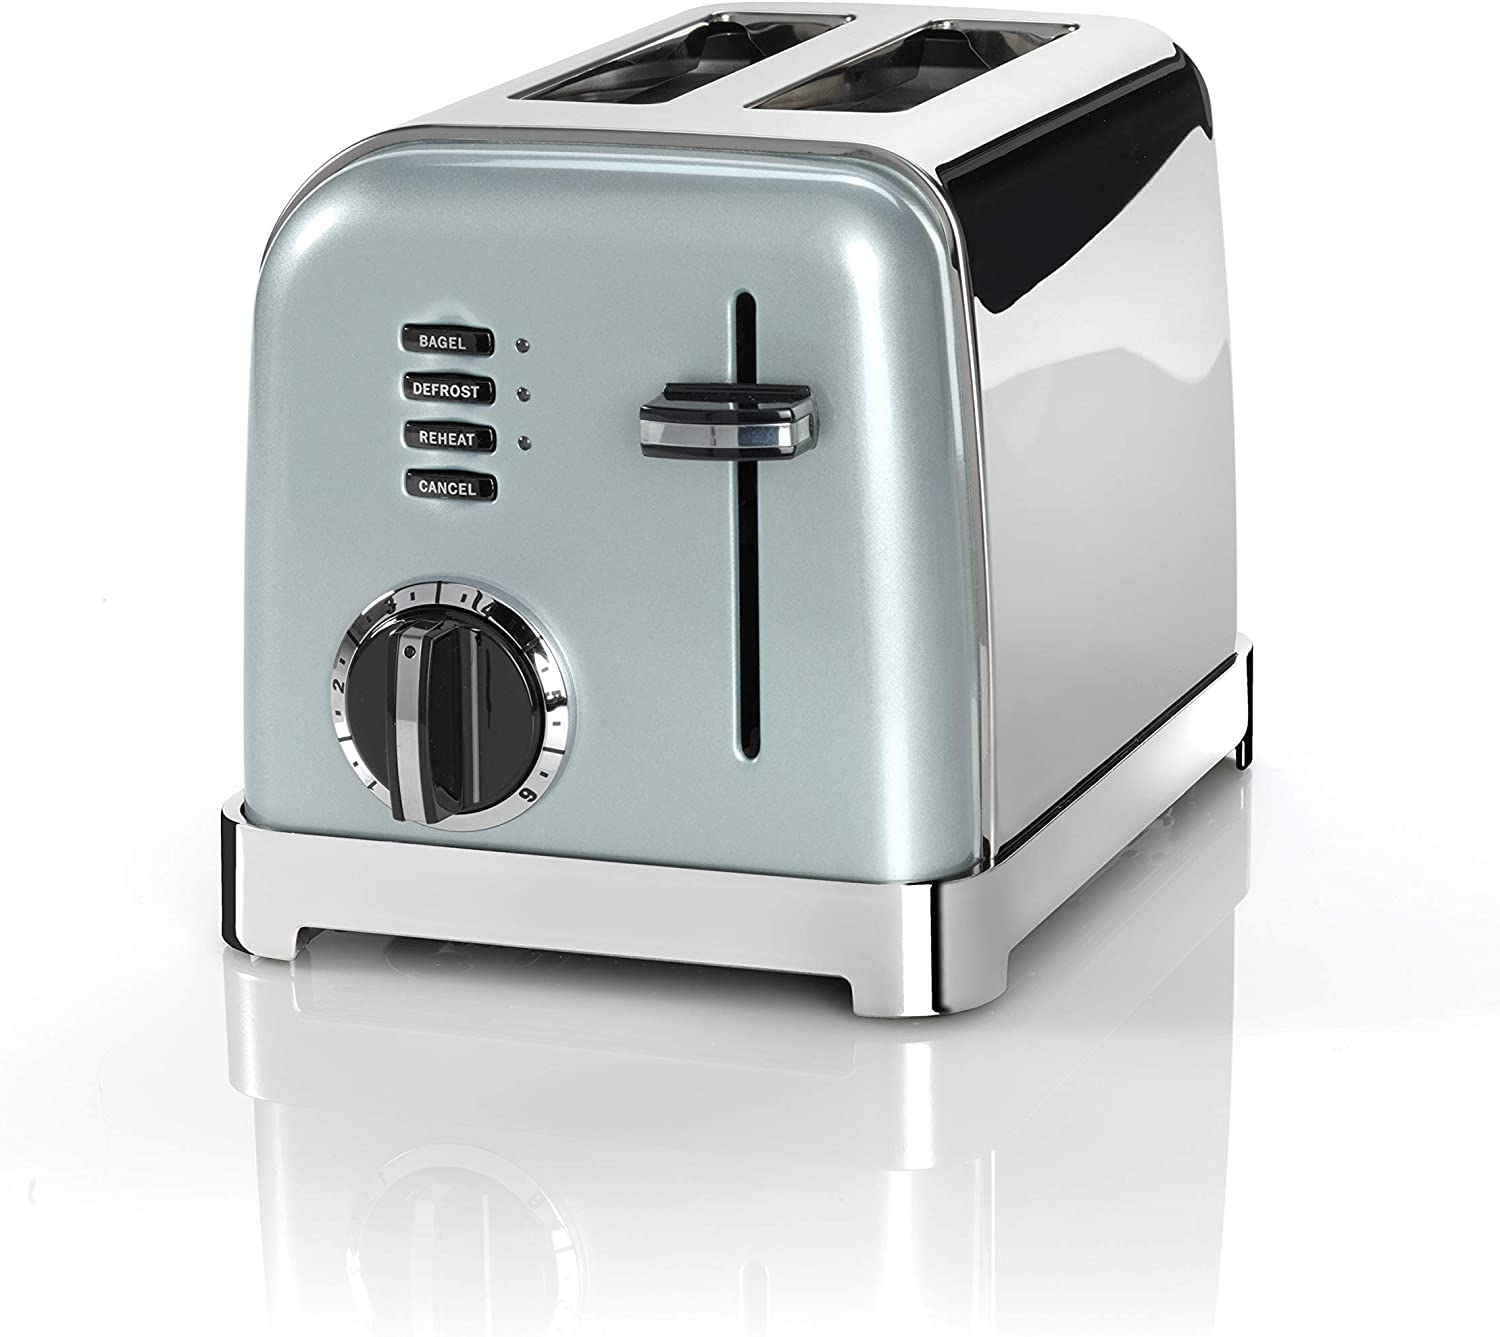 Cuisinart 2-slot toaster with 6 browning levels and defrosting, warm-up and stop function, extra wide toast slots, retro design, green, CPT160GE, 267